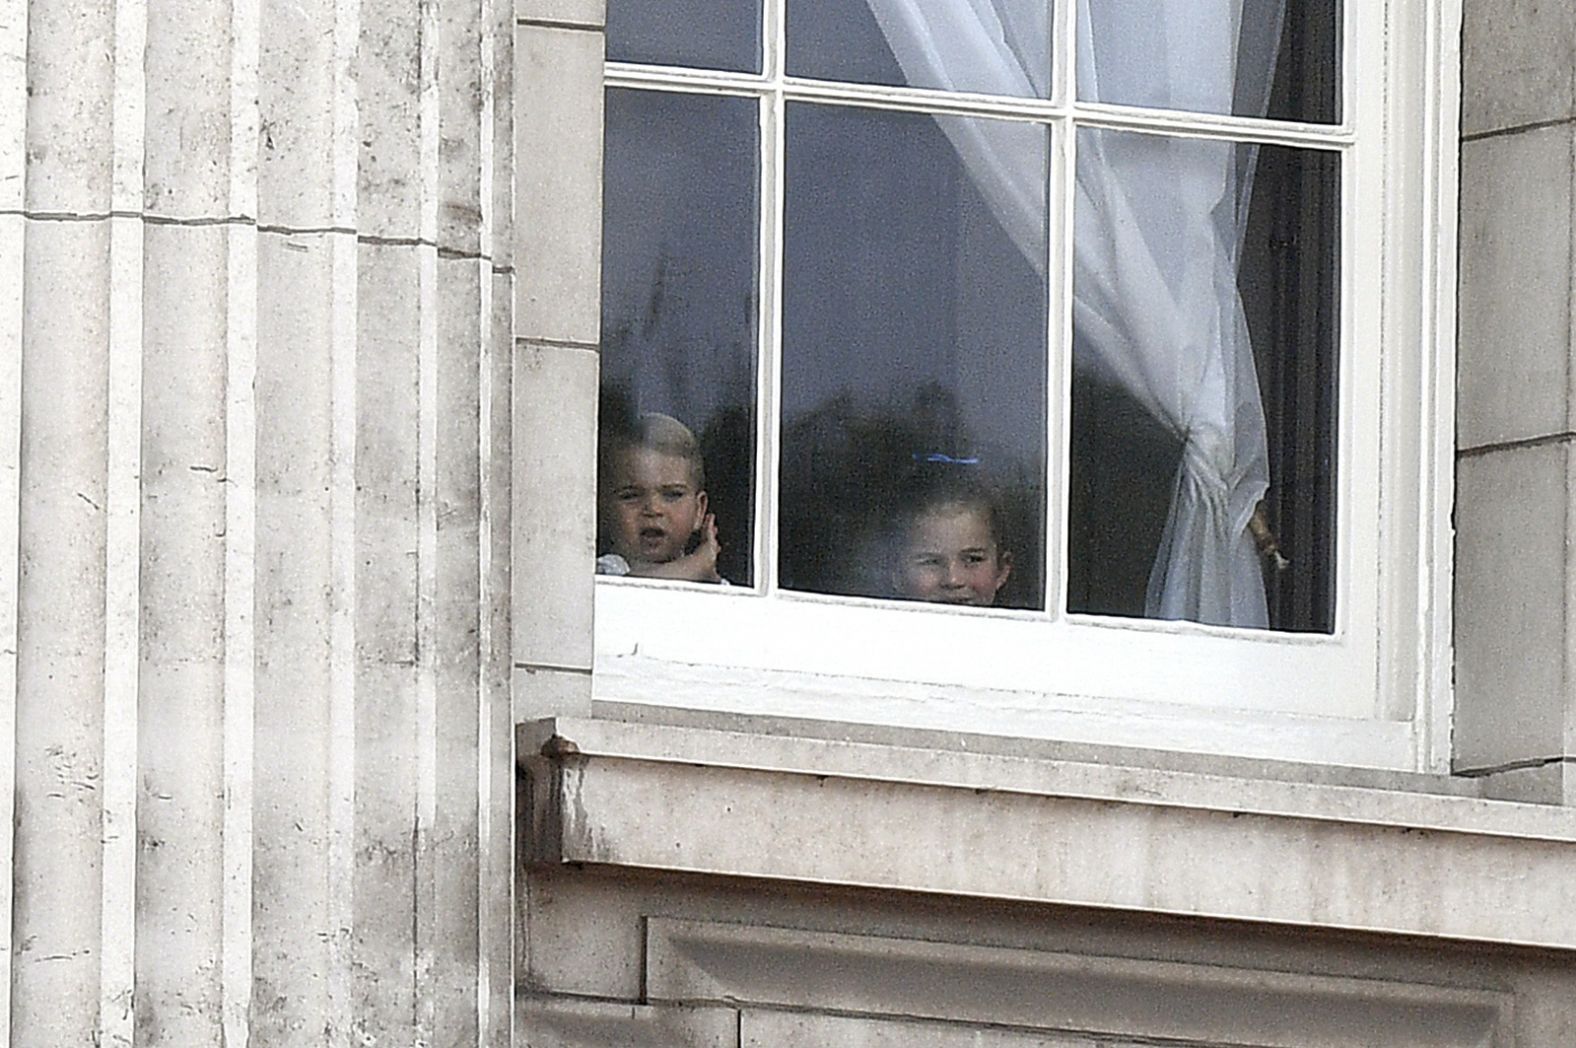 Prince Louis and Princess Charlotte gaze out a window at Buckingham Place to see soldiers on the Mall as part of the Trooping the Colour celebration. They are the children of Prince William and Catherine, Duchess of Cambridge.